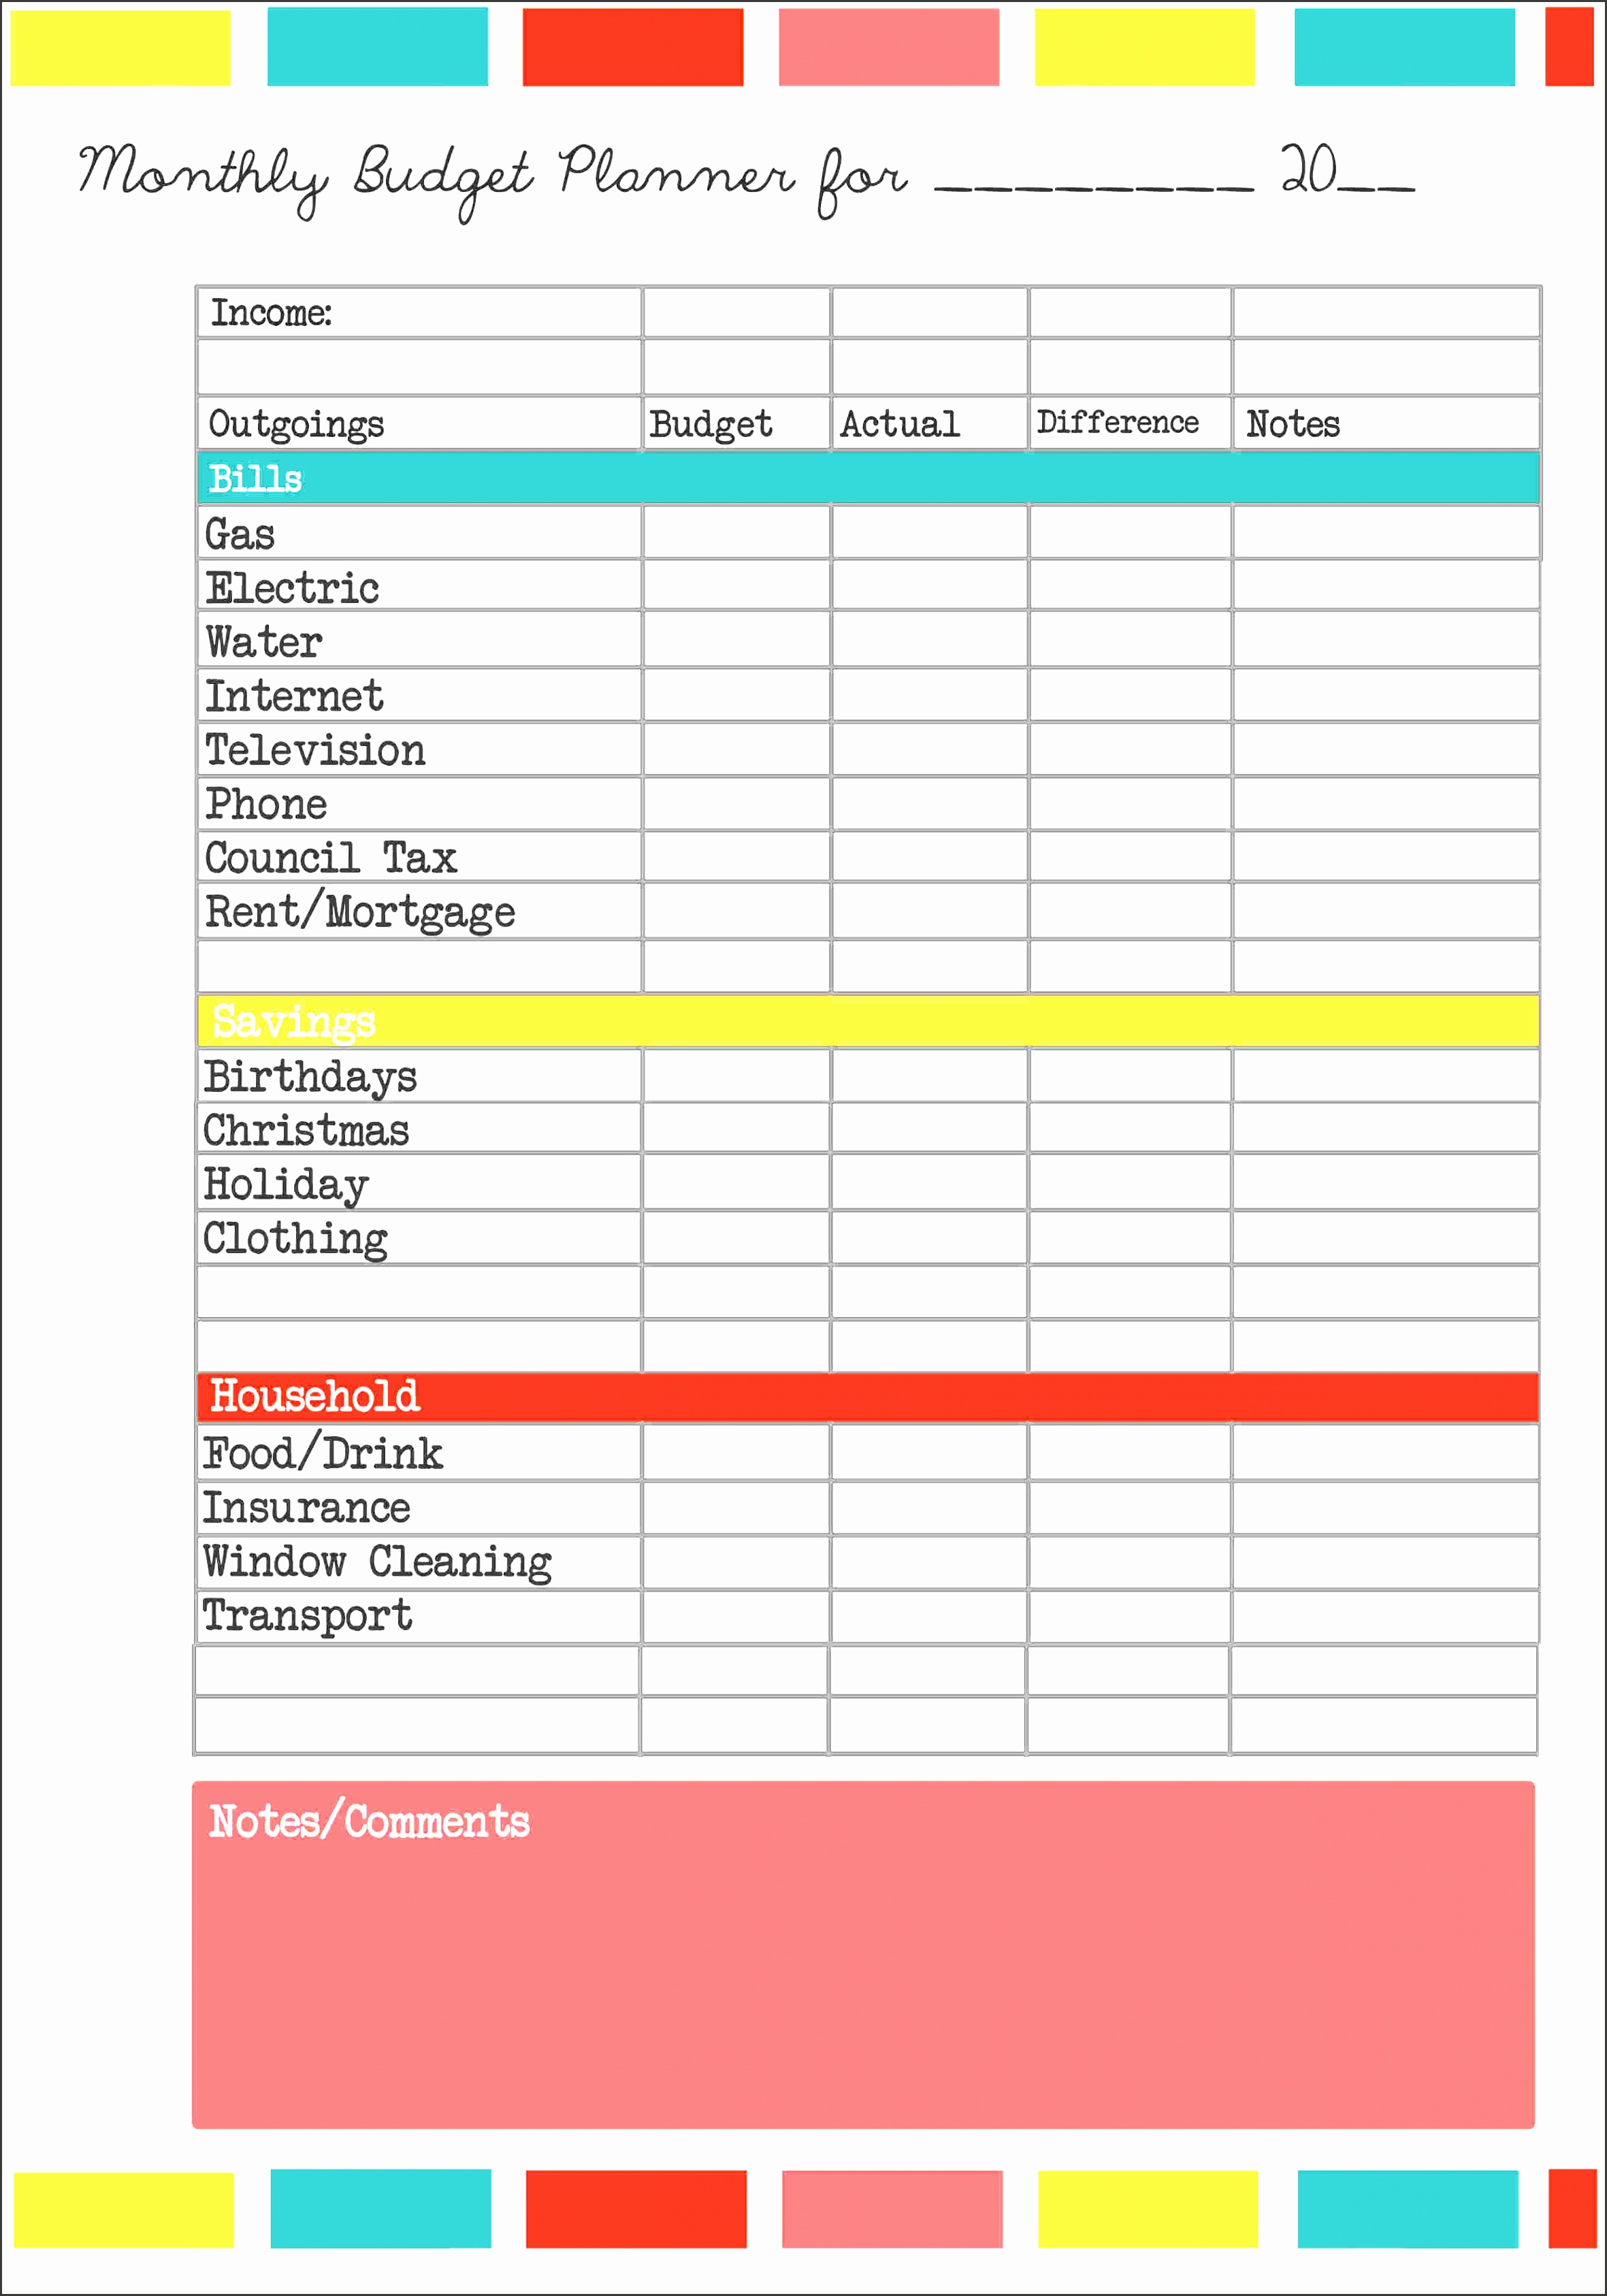 household-budget-template-daxicon